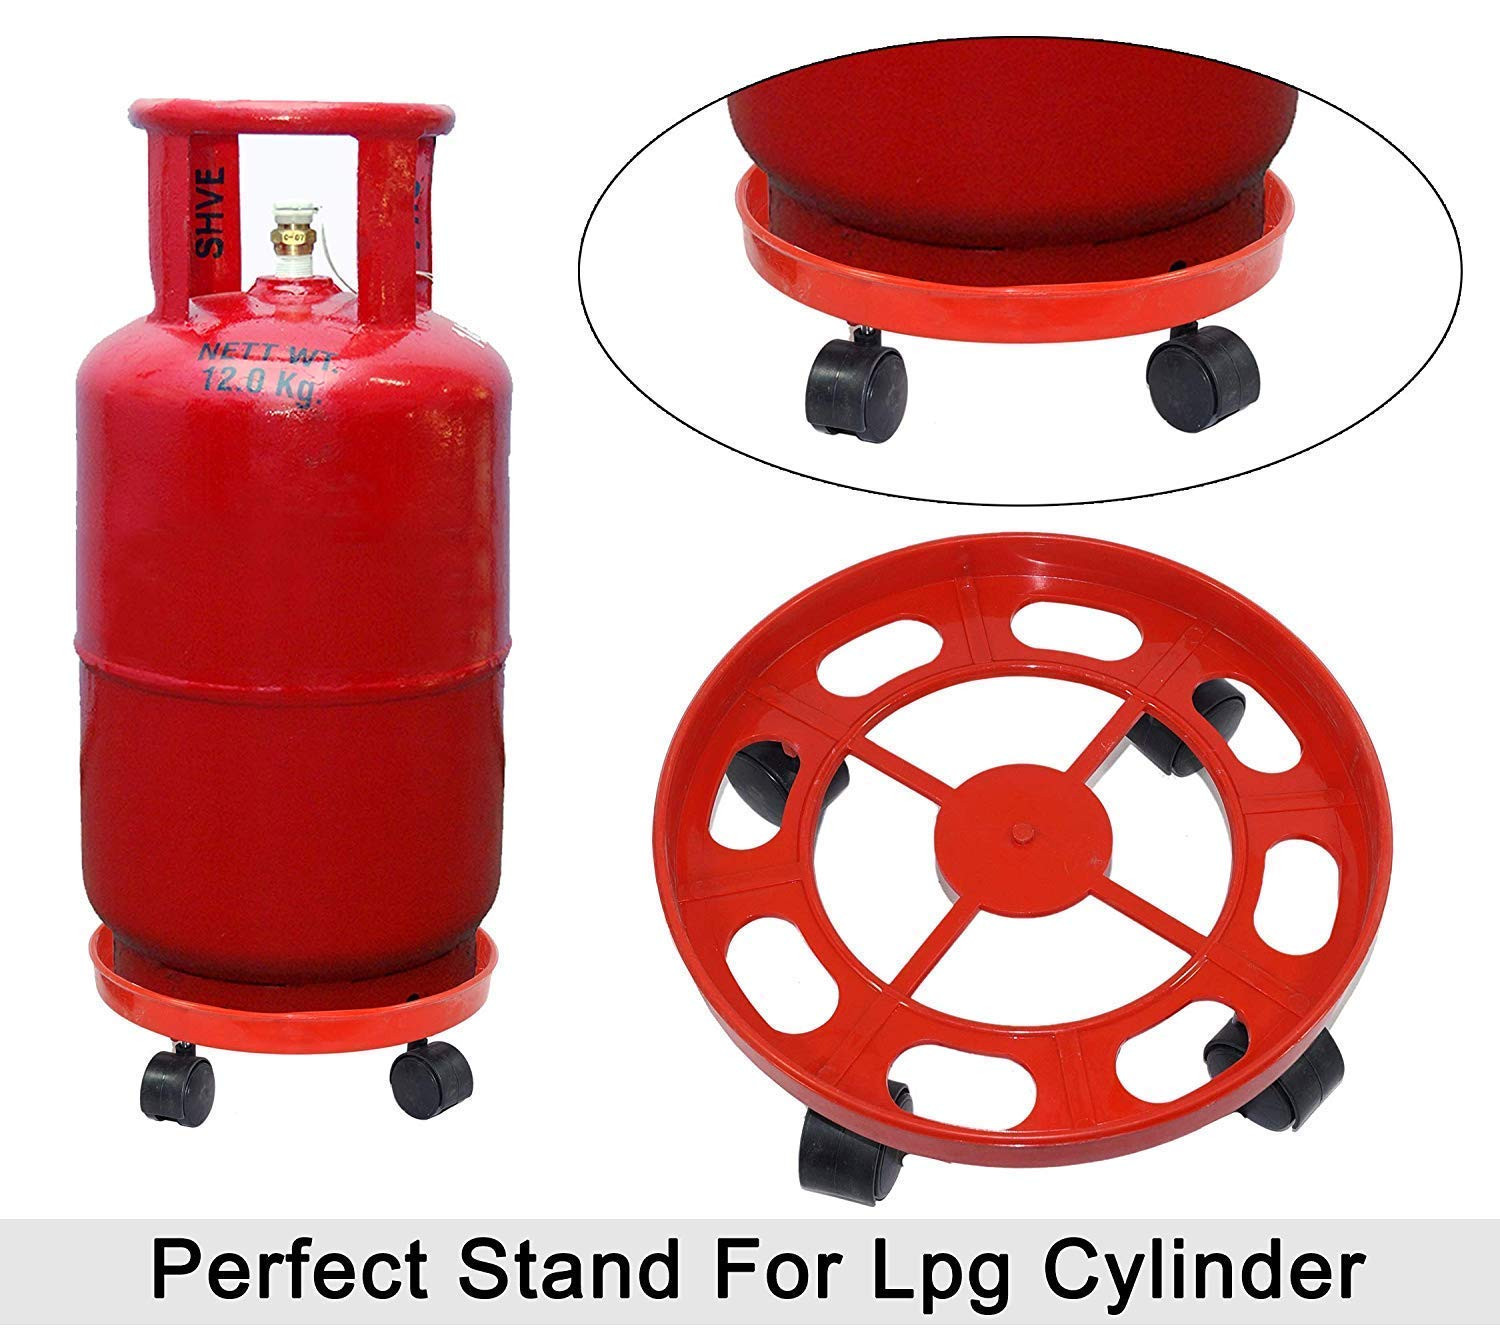 Kuber industries Cylinder Easily Movable Plastic Trolley Stand with Wheels (Blue & Red)